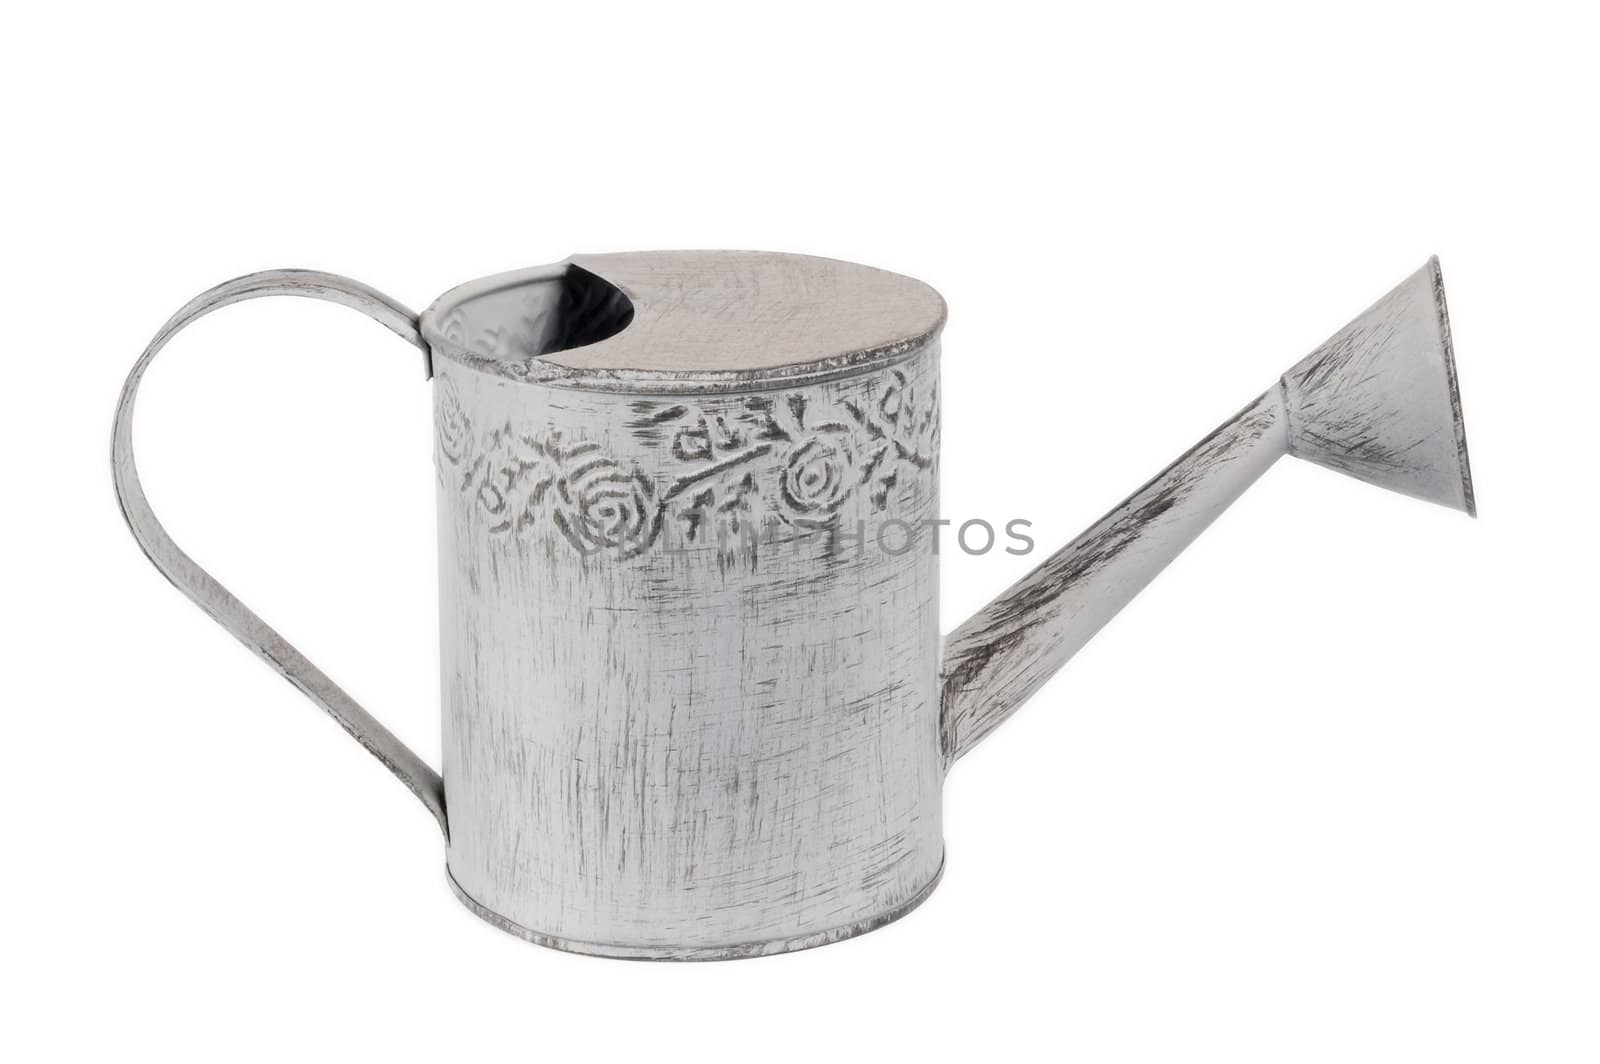 Vintage watering can on white